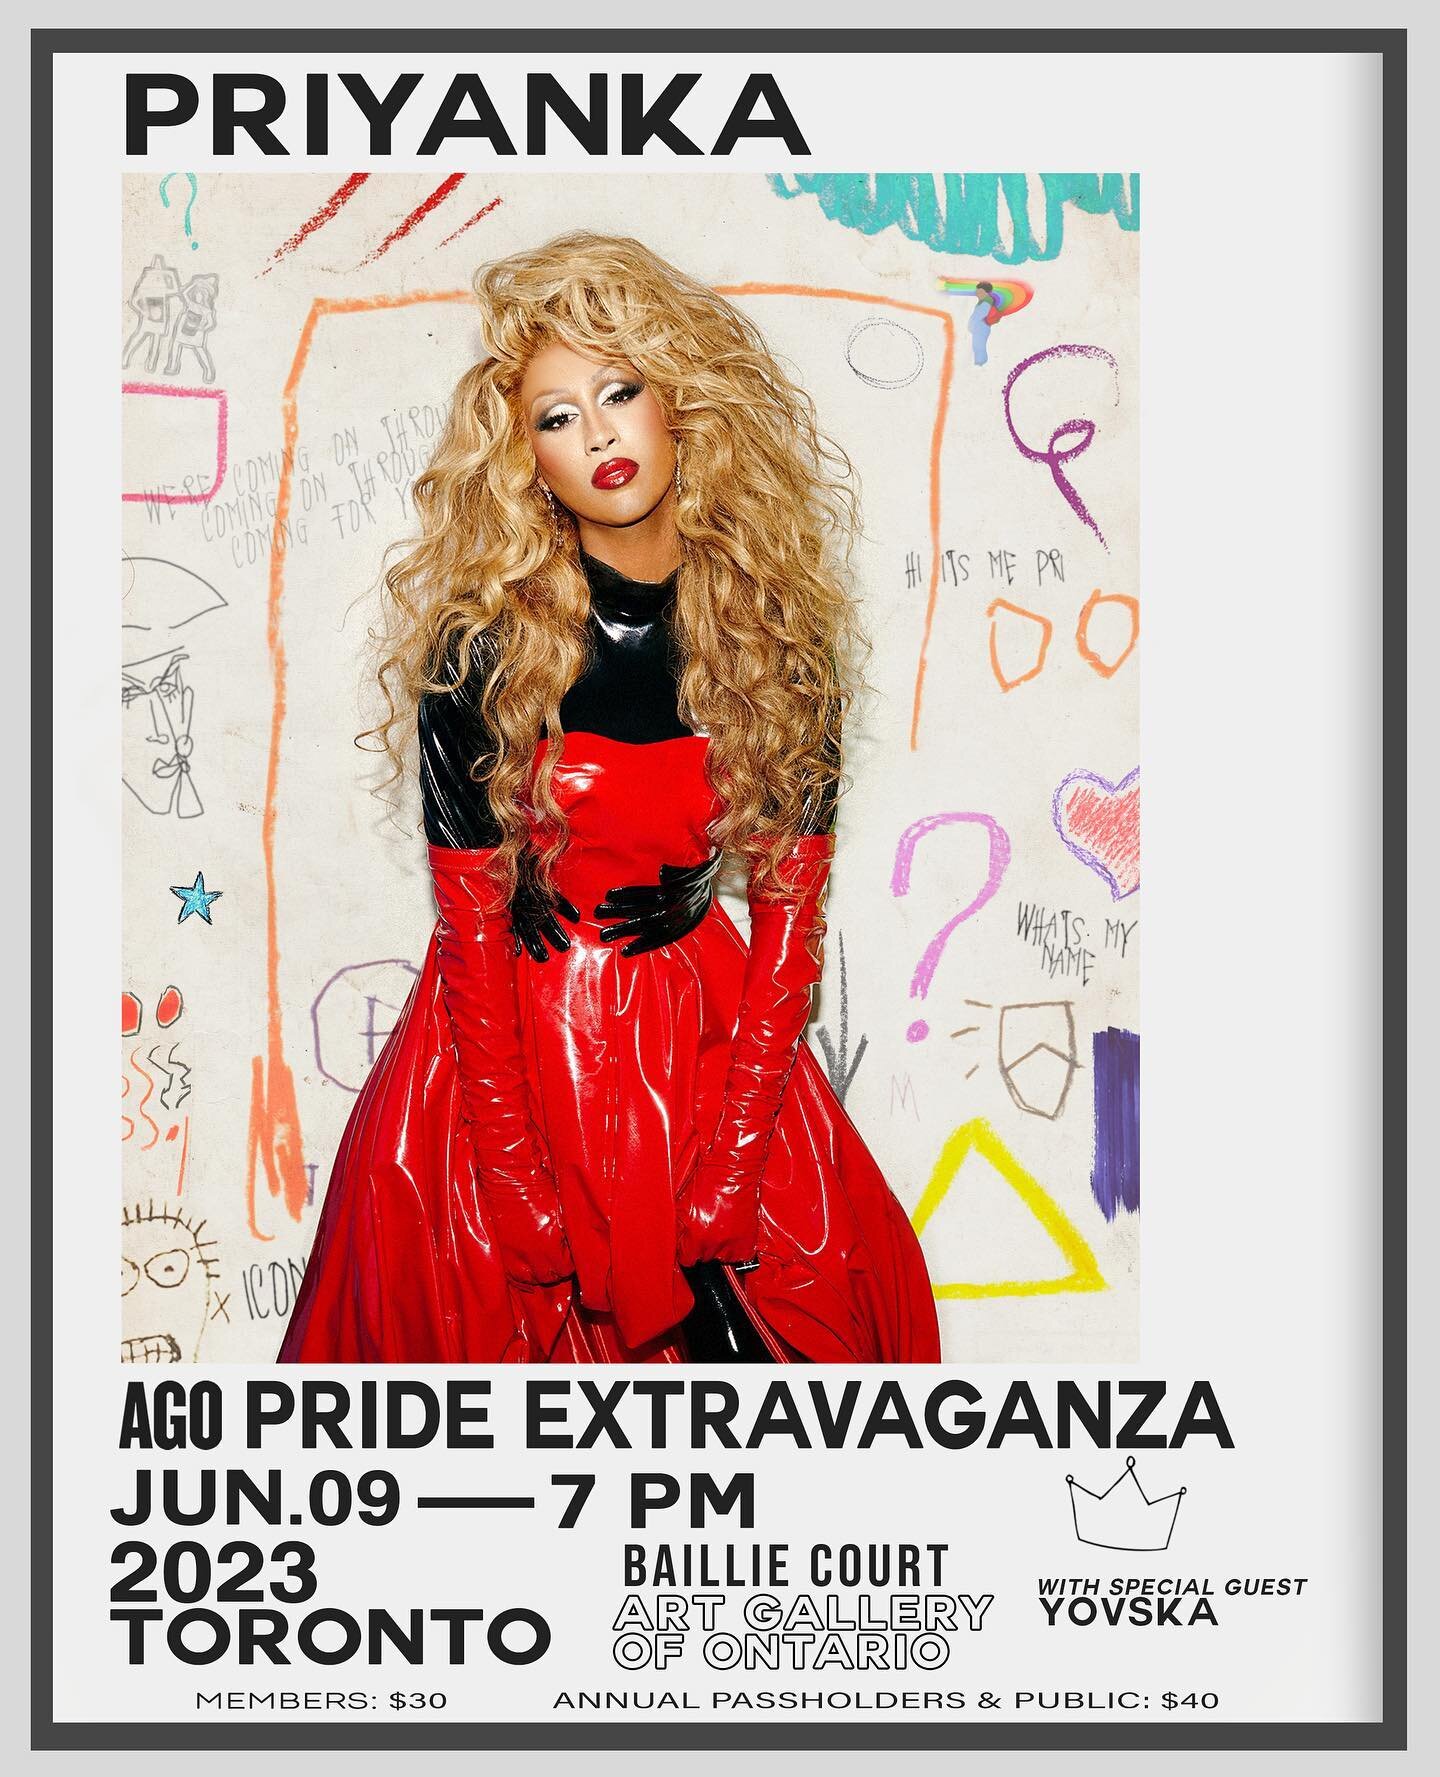 Pride! Pride! Pride! 

I&rsquo;m bringing an iconic new show to the @agotoronto in Toronto on June 09 to celebrate PRIDE with new songs, dancers, and a big eff you to all conservatives! This is our time to be LOUD and PROUD baby! AND if you wanna see